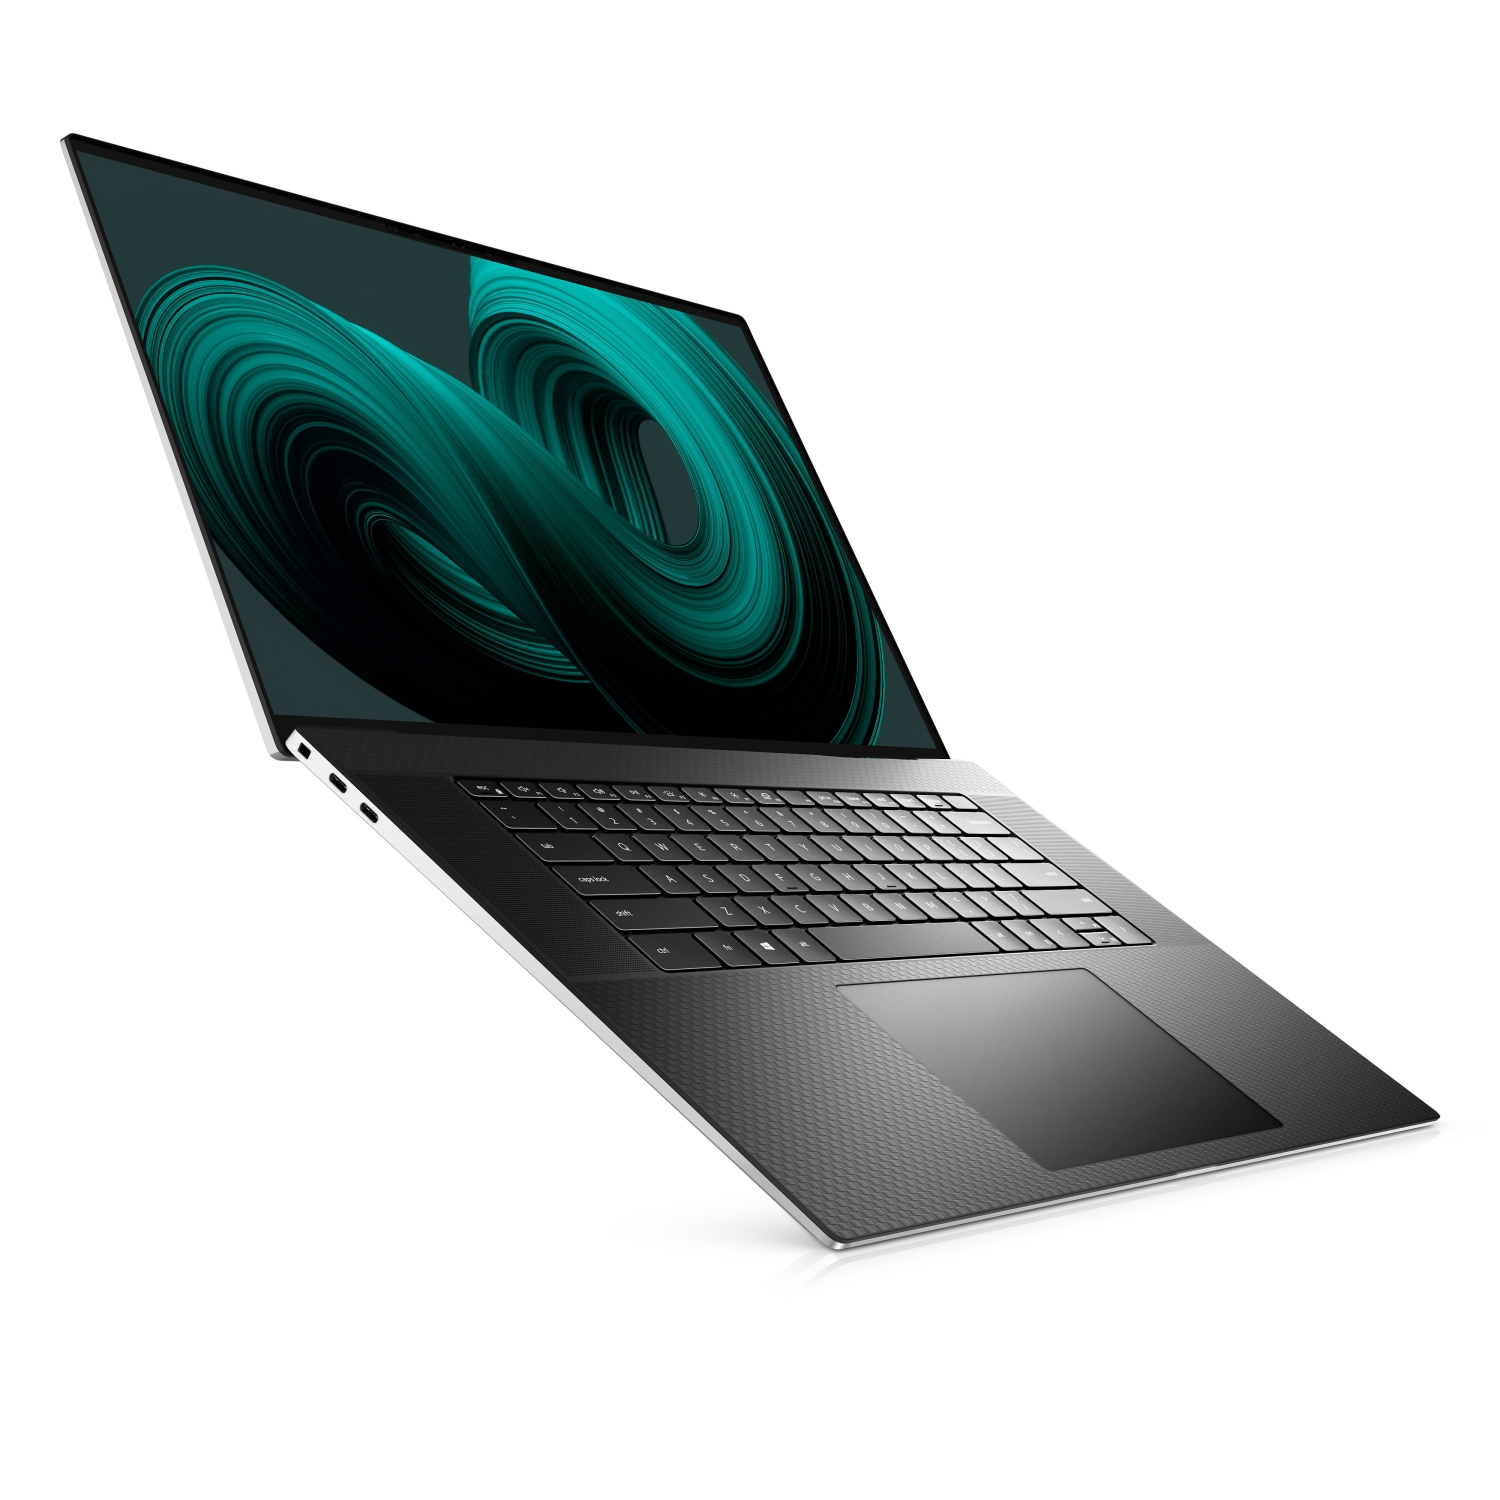 Refurbished (Excellent) - Dell XPS 17 9710 Laptop (2021), 17" 4K Touch, Core i7 - 512GB SSD - 64GB RAM - RTX 3060, 8 Cores @ 4.6 GHz - 11th Gen CPU Certified Refurbished